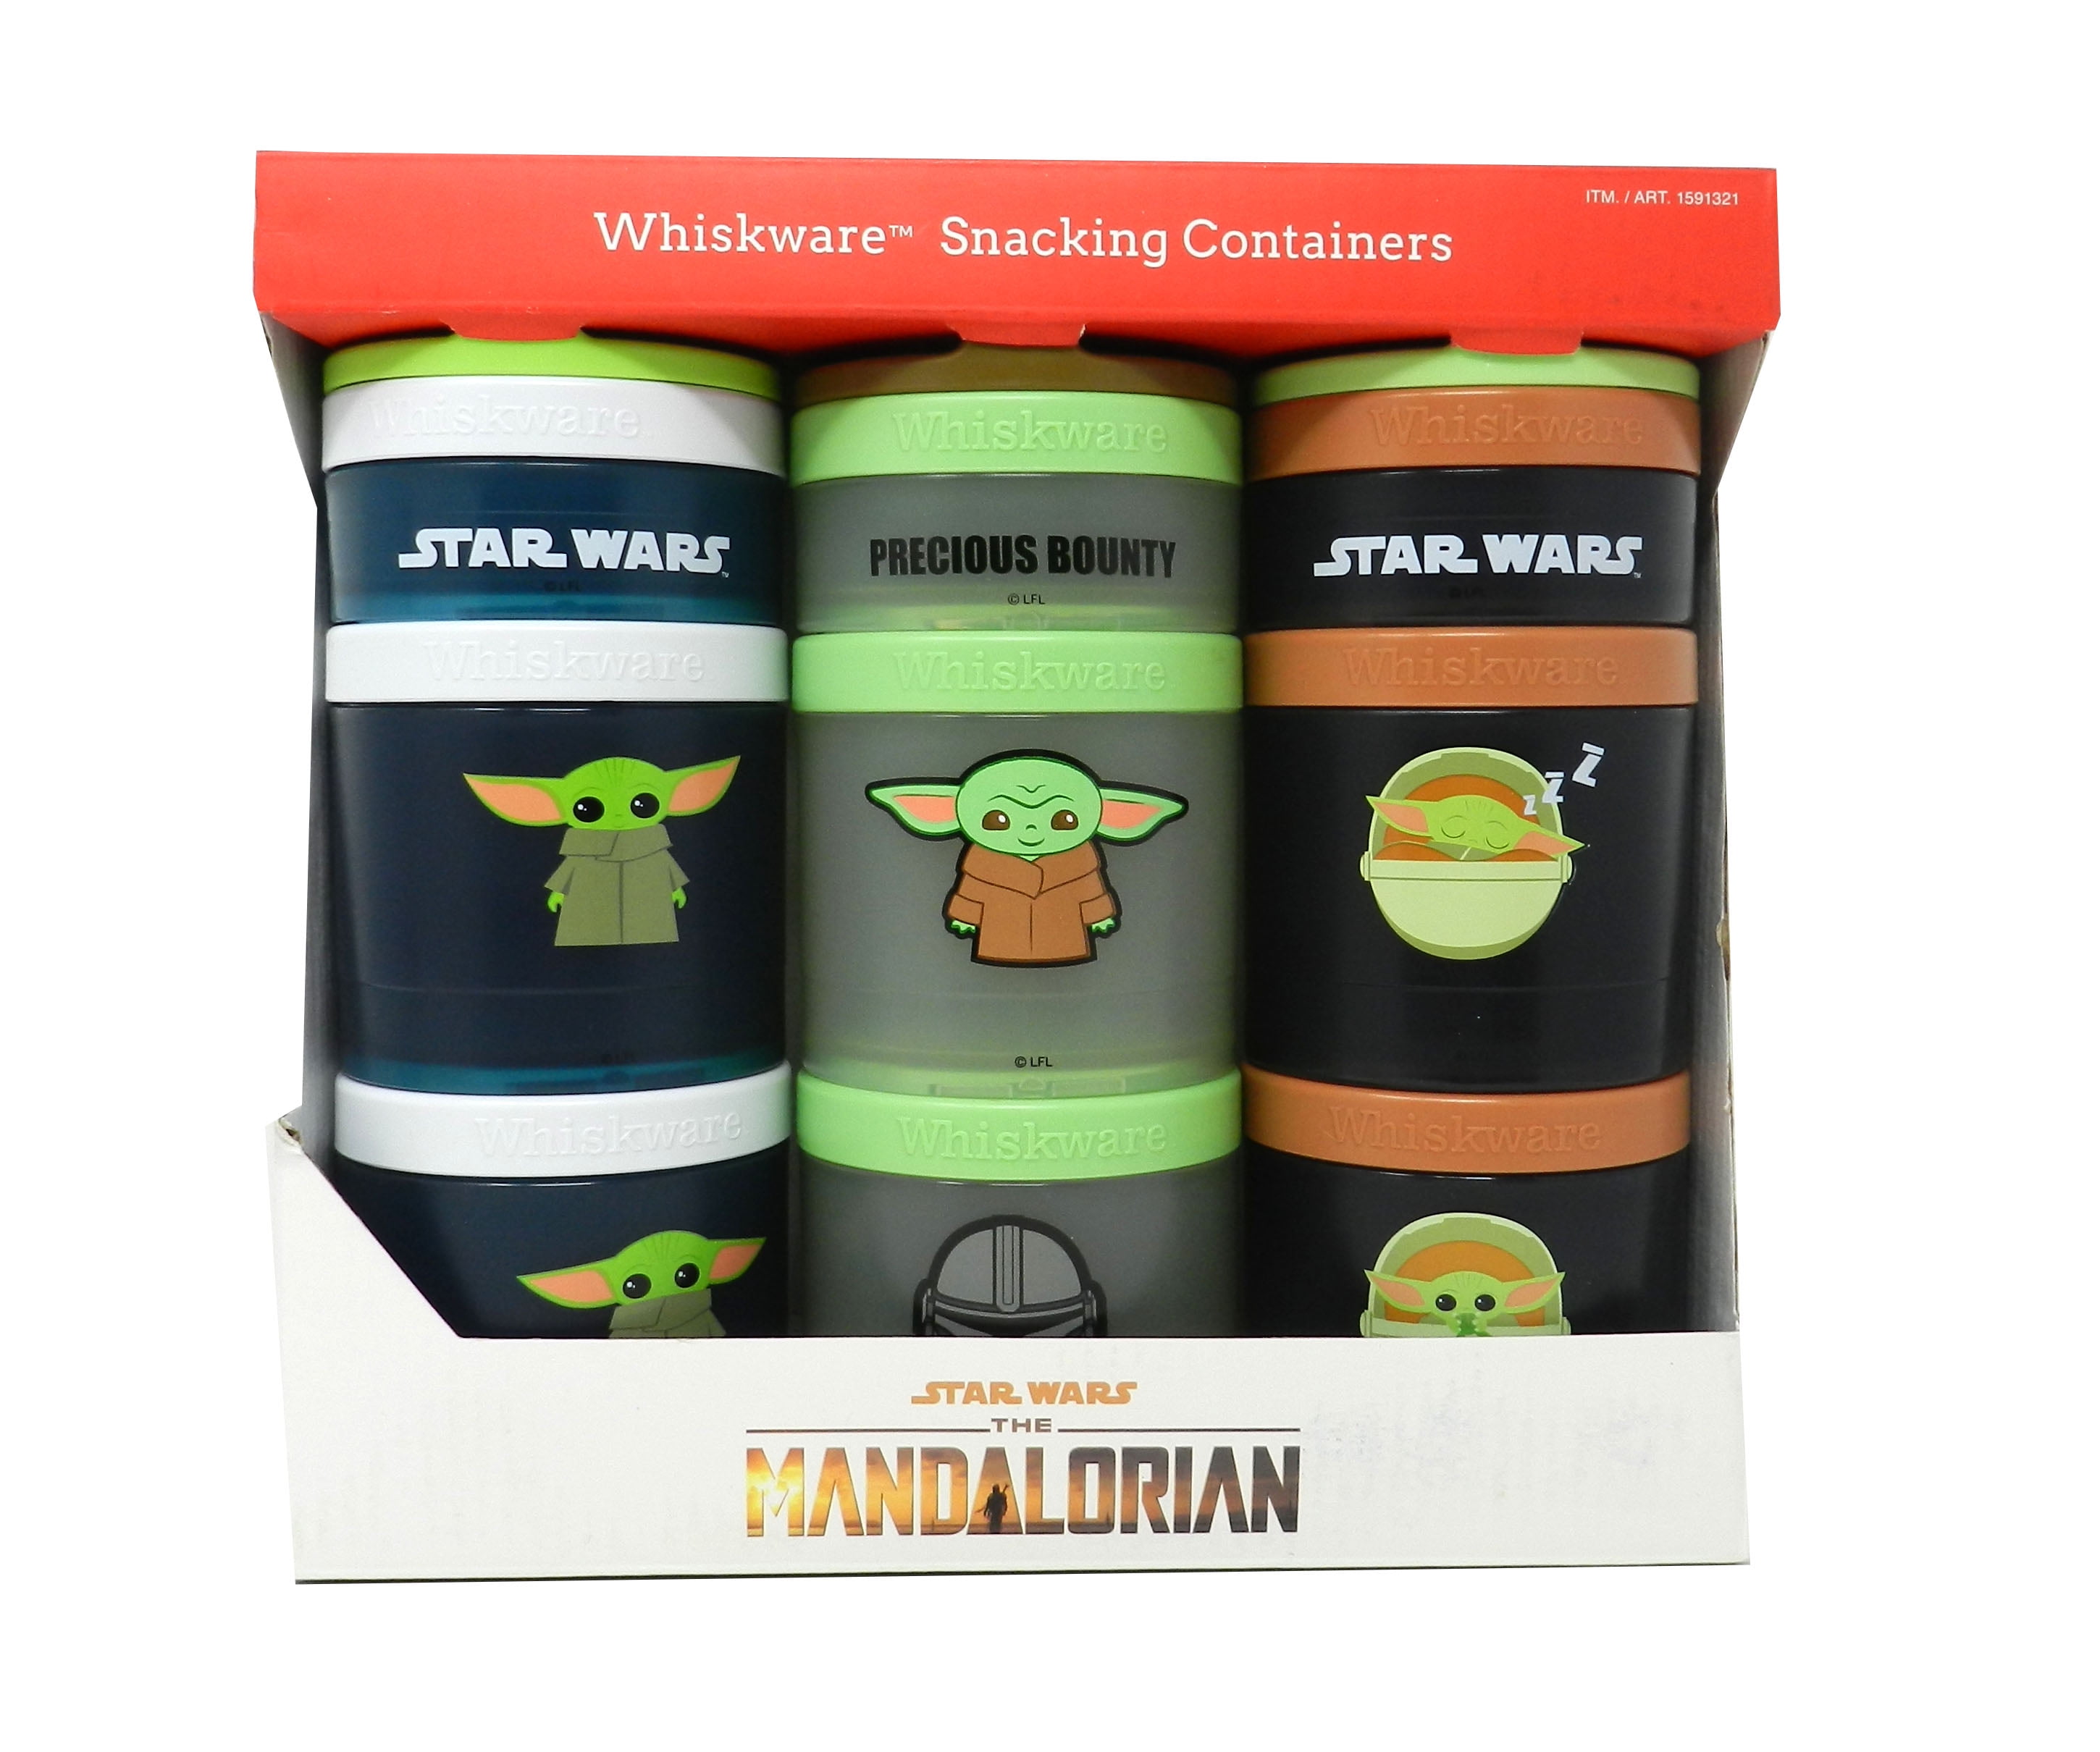 Whiskware Star Wars Stackable Snack Pack Containers Chewbacca & C-3PO